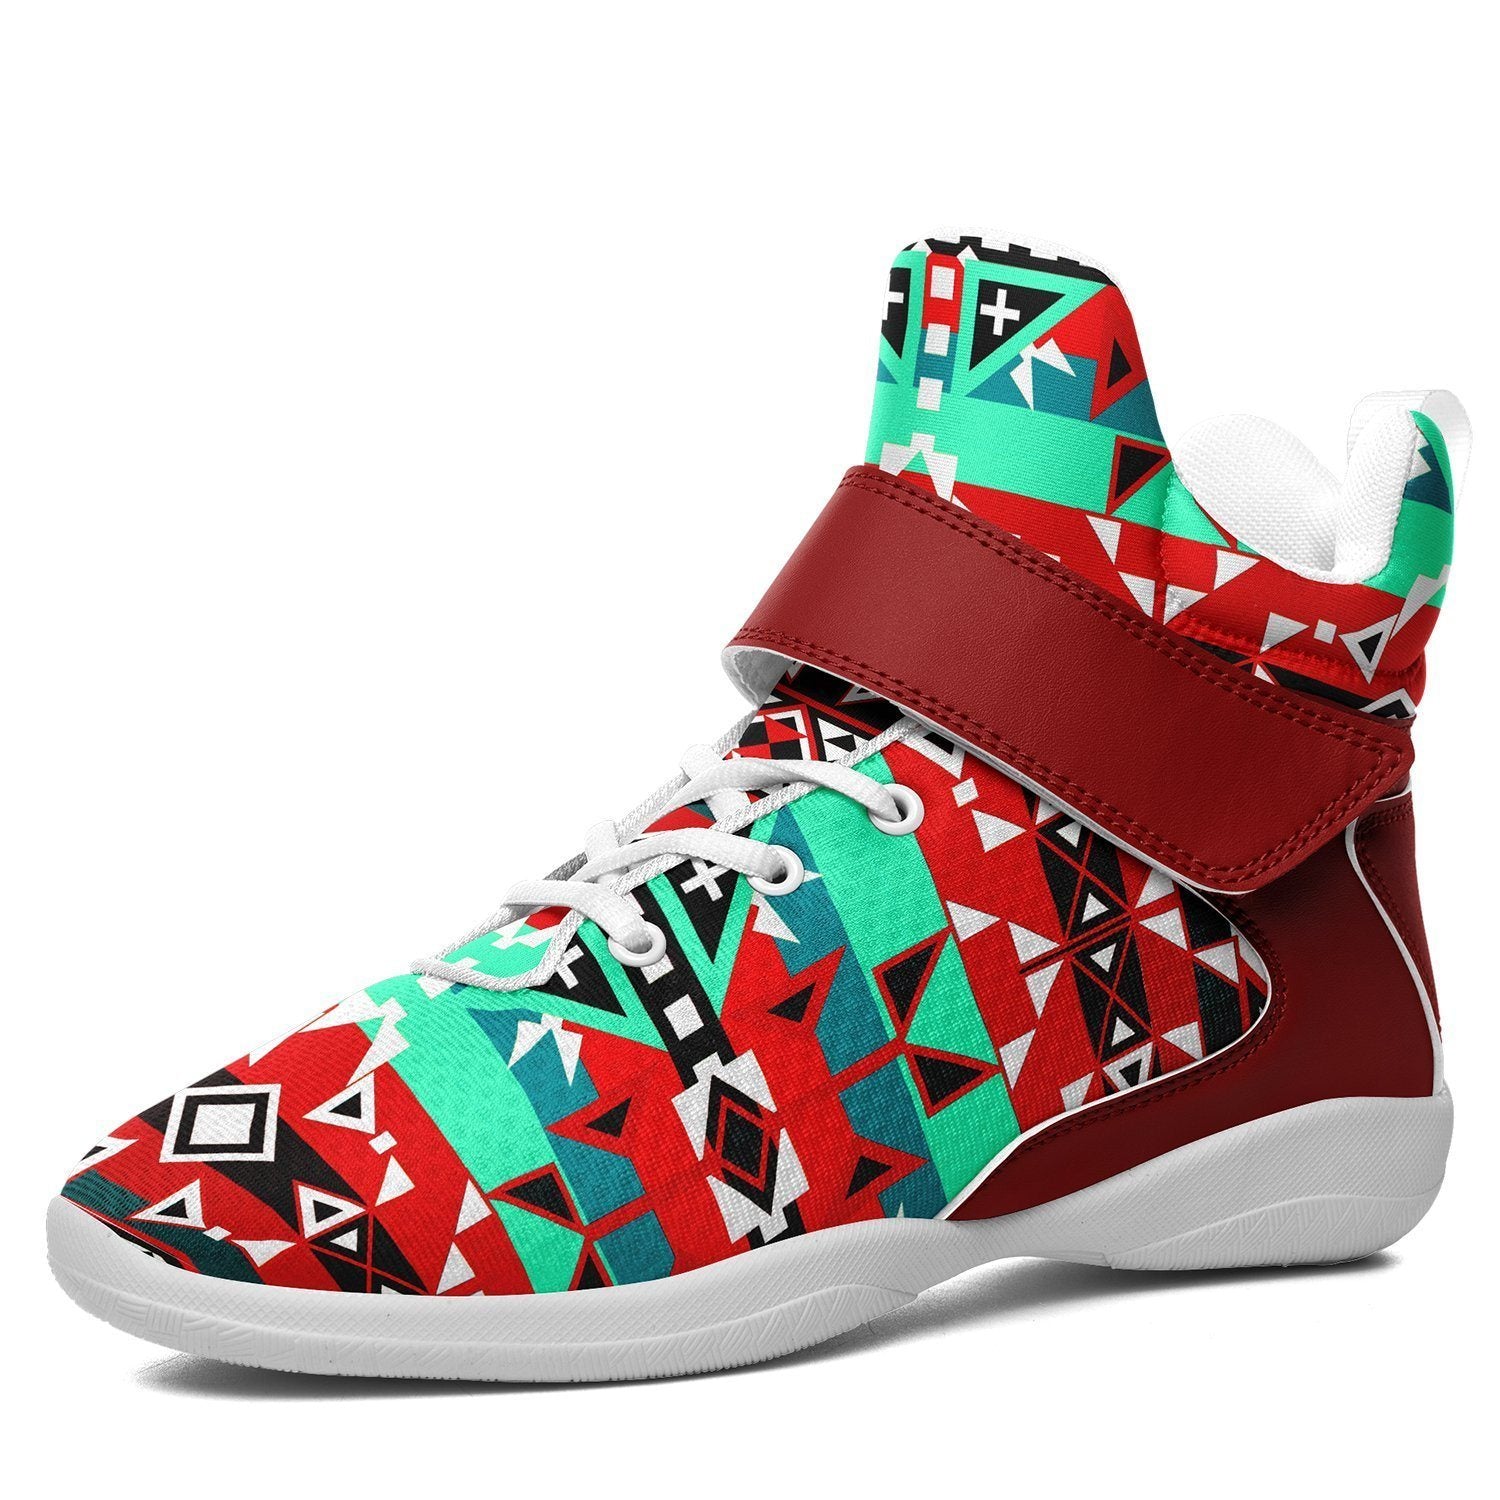 After the Southwest Rain Kid's Ipottaa Basketball / Sport High Top Shoes 49 Dzine US Child 12.5 / EUR 30 White Sole with Dark Red Strap 